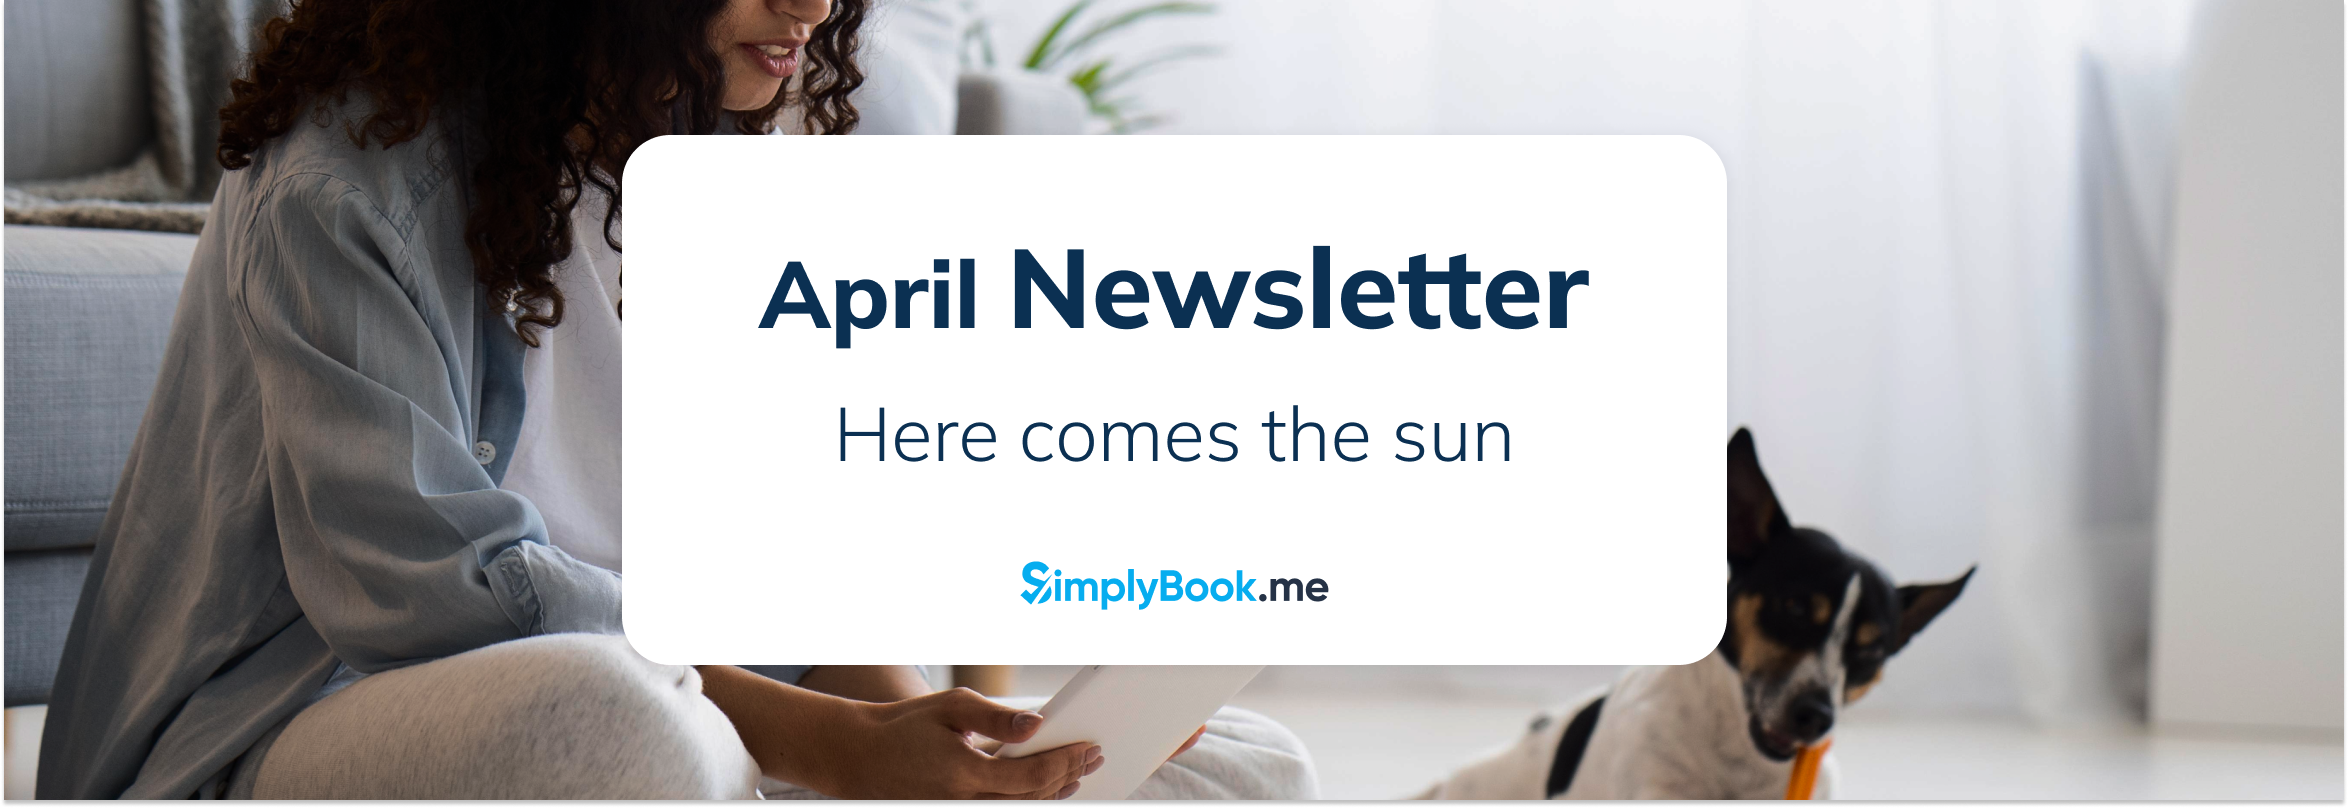 April Newsletter - You don't want to missout on these new developments